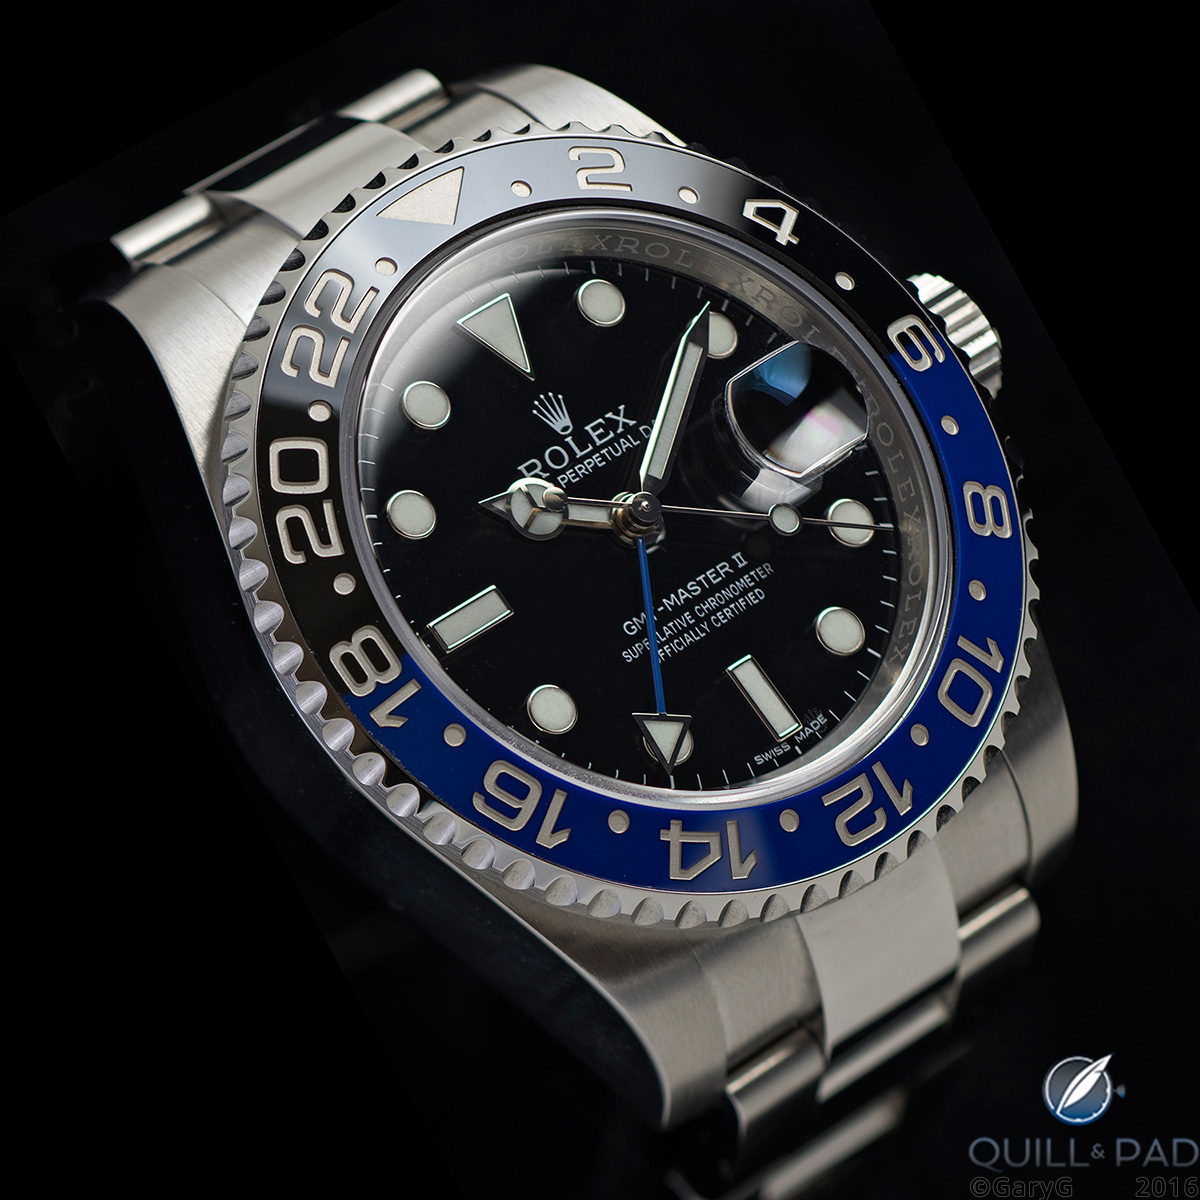 Attractive and robust: Rolex GMT Master II BLNR